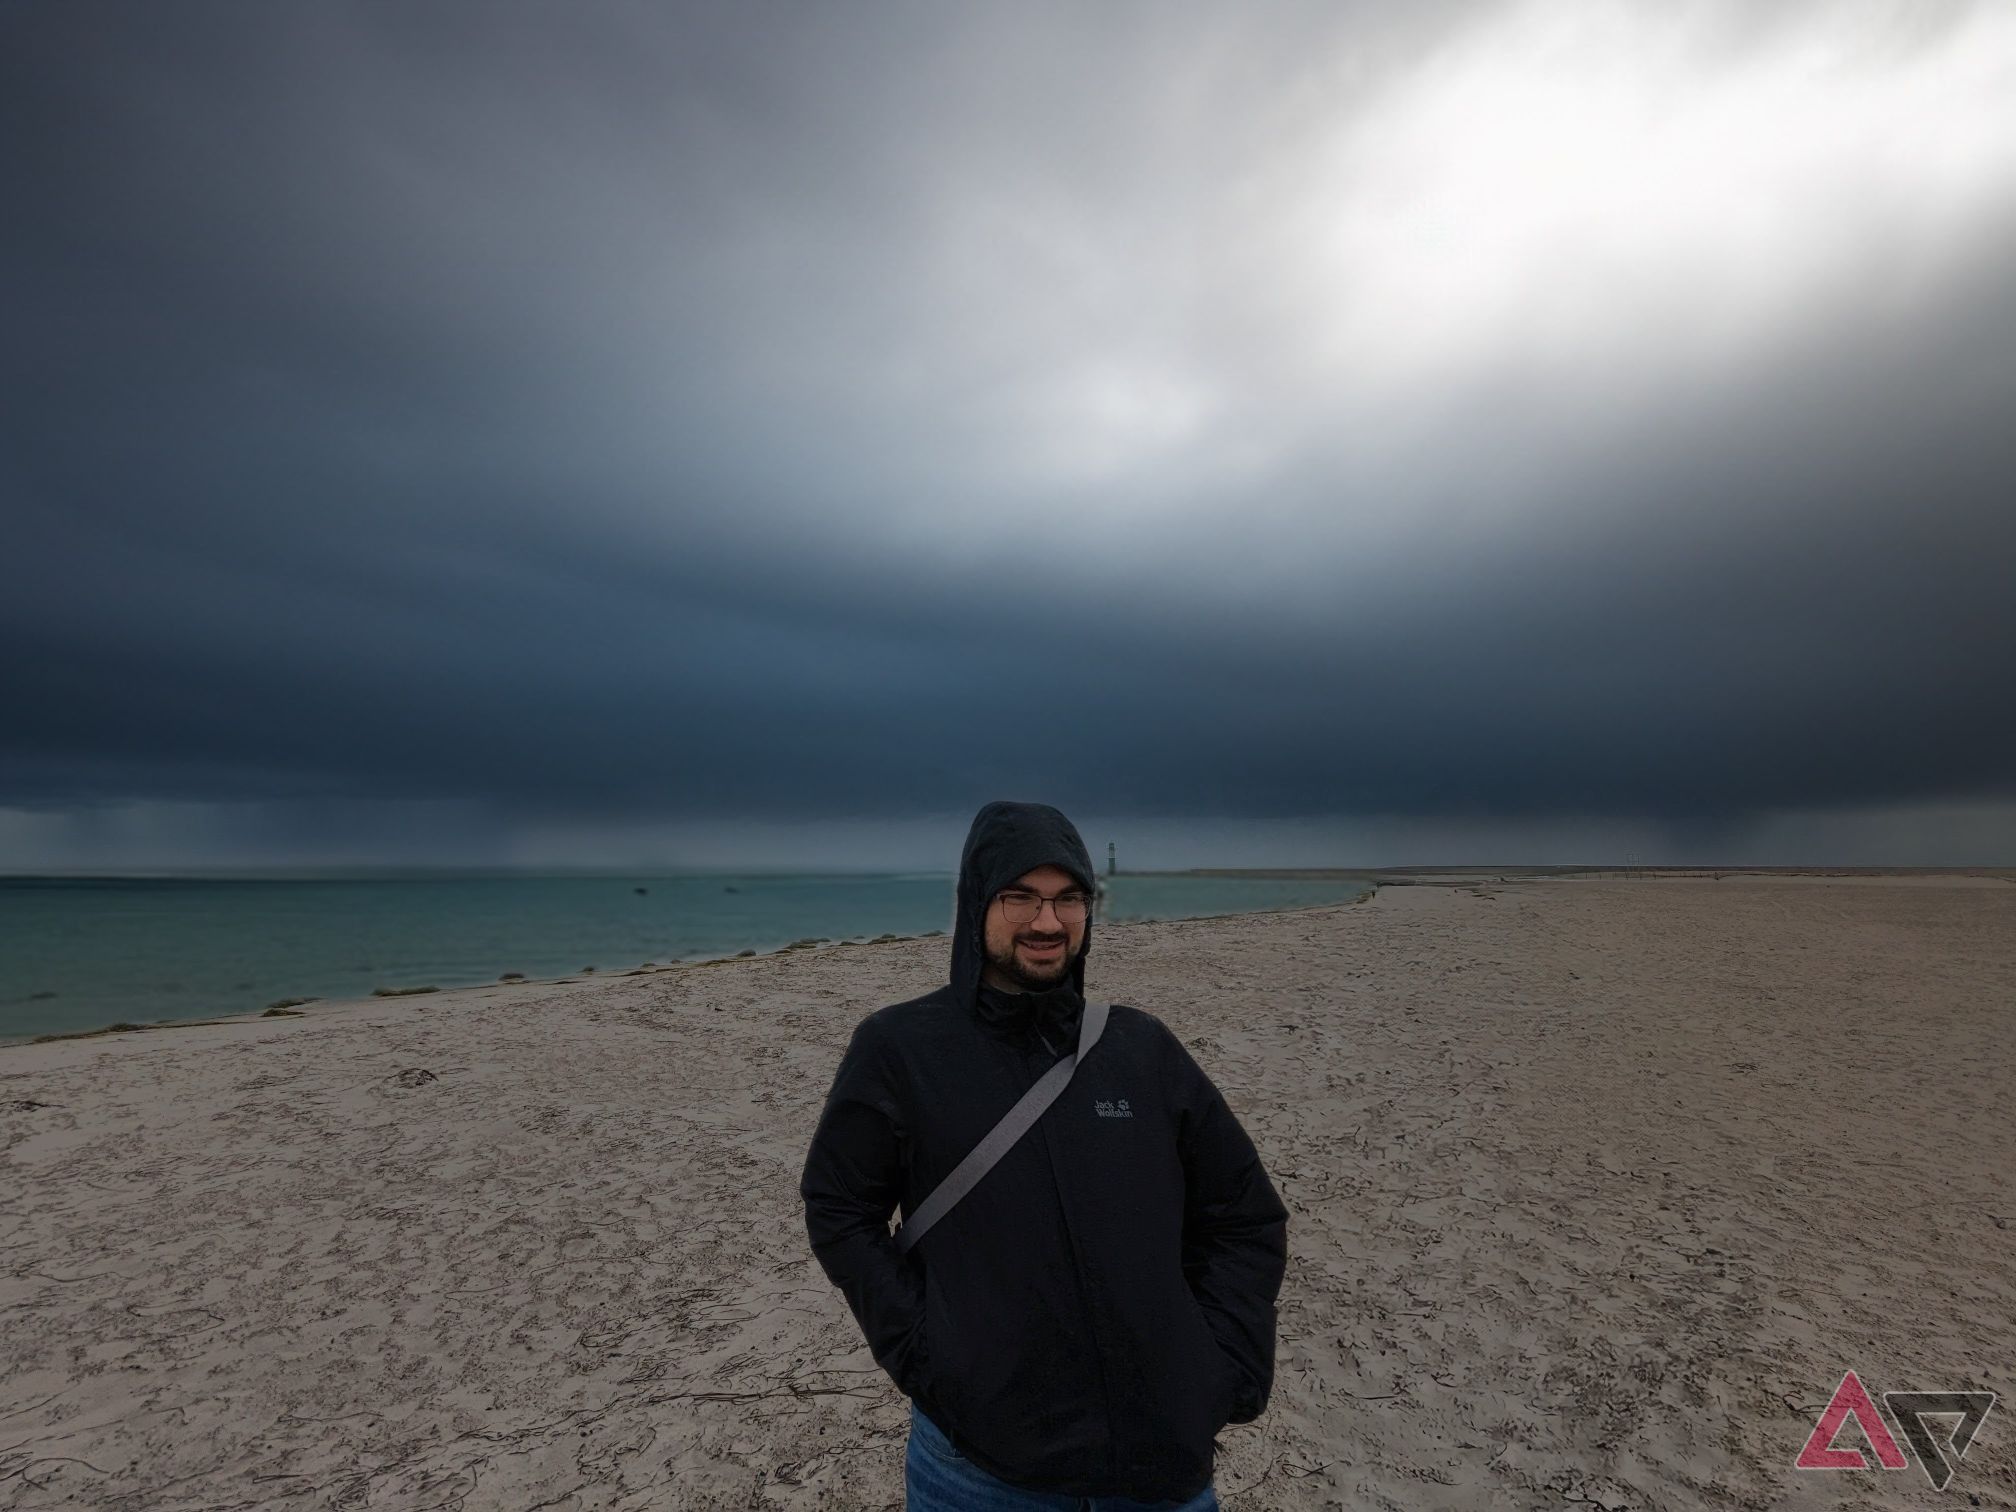 man standing in front of edited in storm clounds on beach